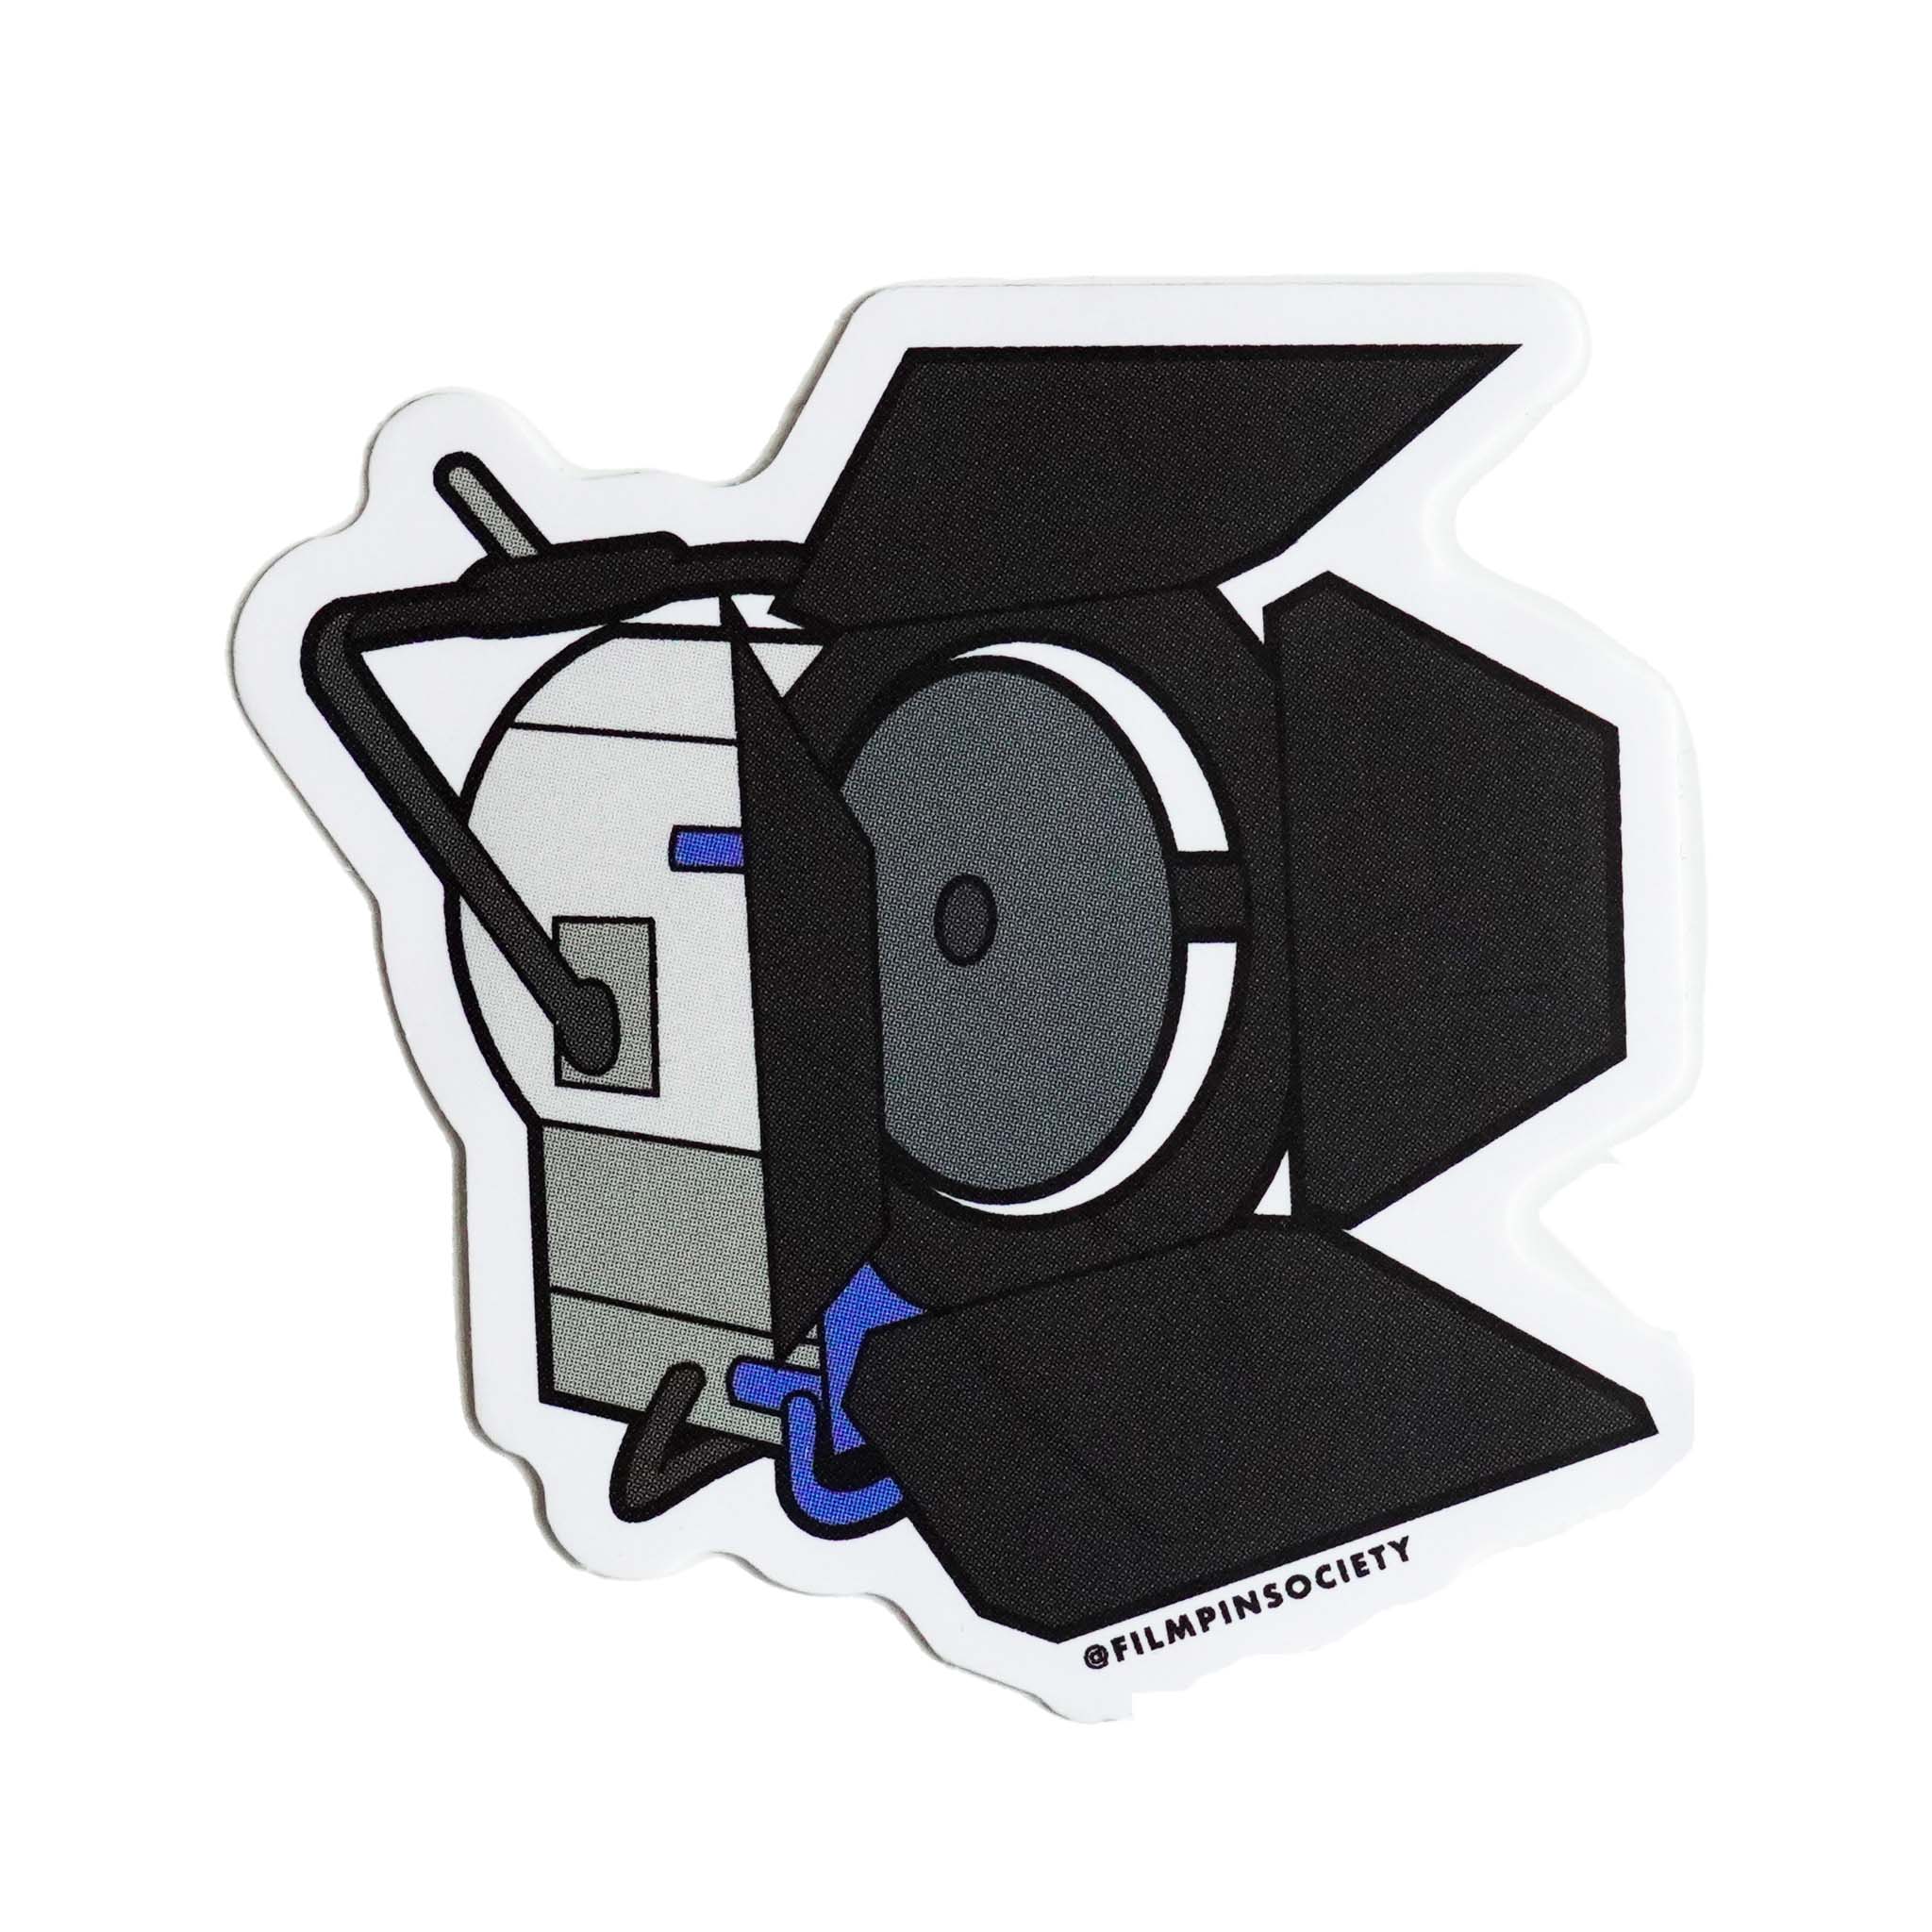 FILM PRODUCTION STICKER PACK